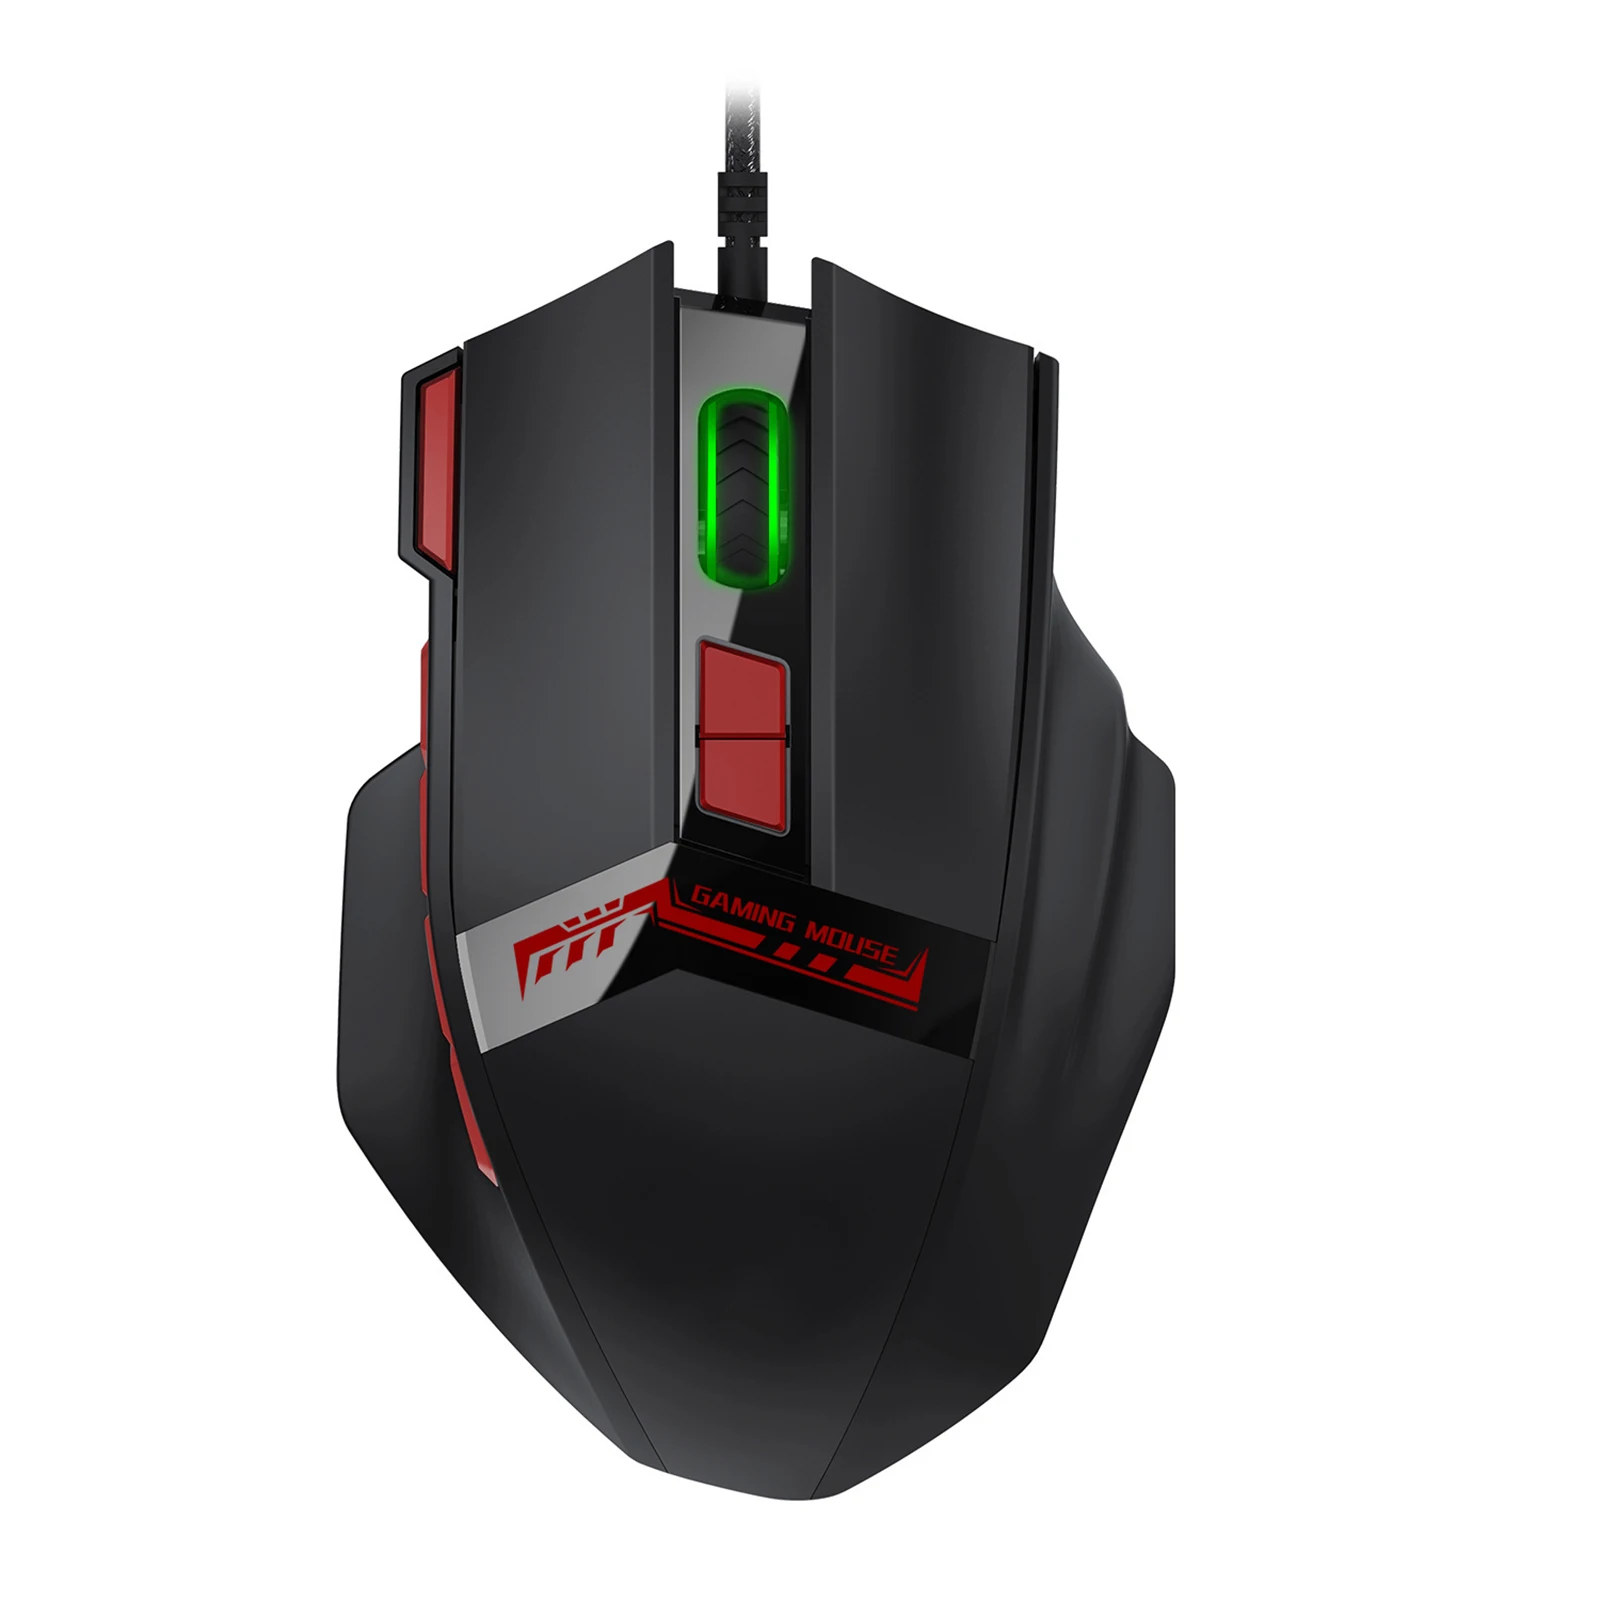 

Wired Mouse 10 Buttons USB Gaming Mouse with RGB Light 1000/1600/2400/3200DPI Weight Tuning for Desktop Laptop